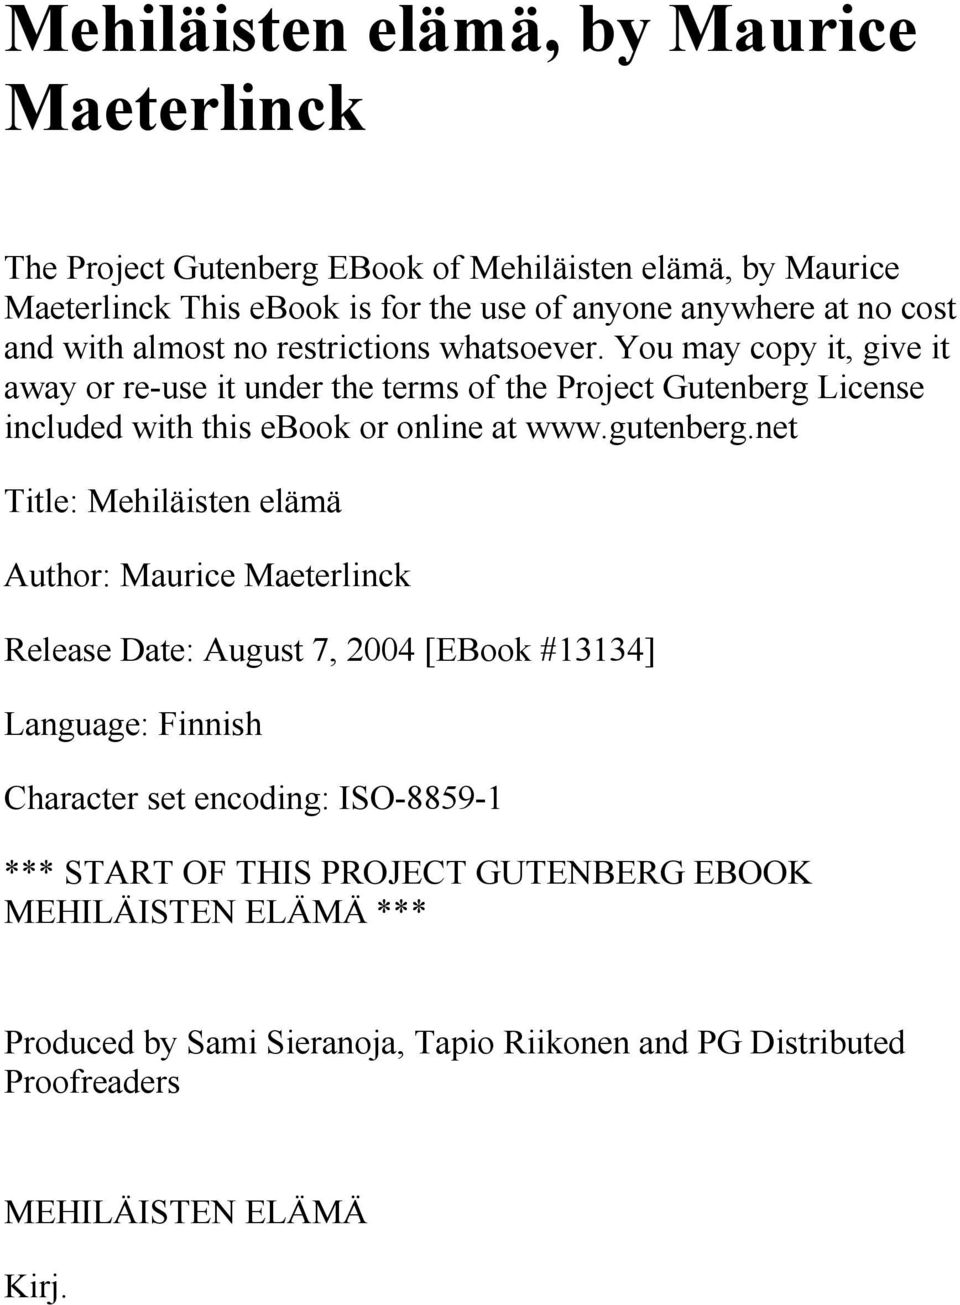 You may copy it, give it away or re-use it under the terms of the Project Gutenberg License included with this ebook or online at www.gutenberg.